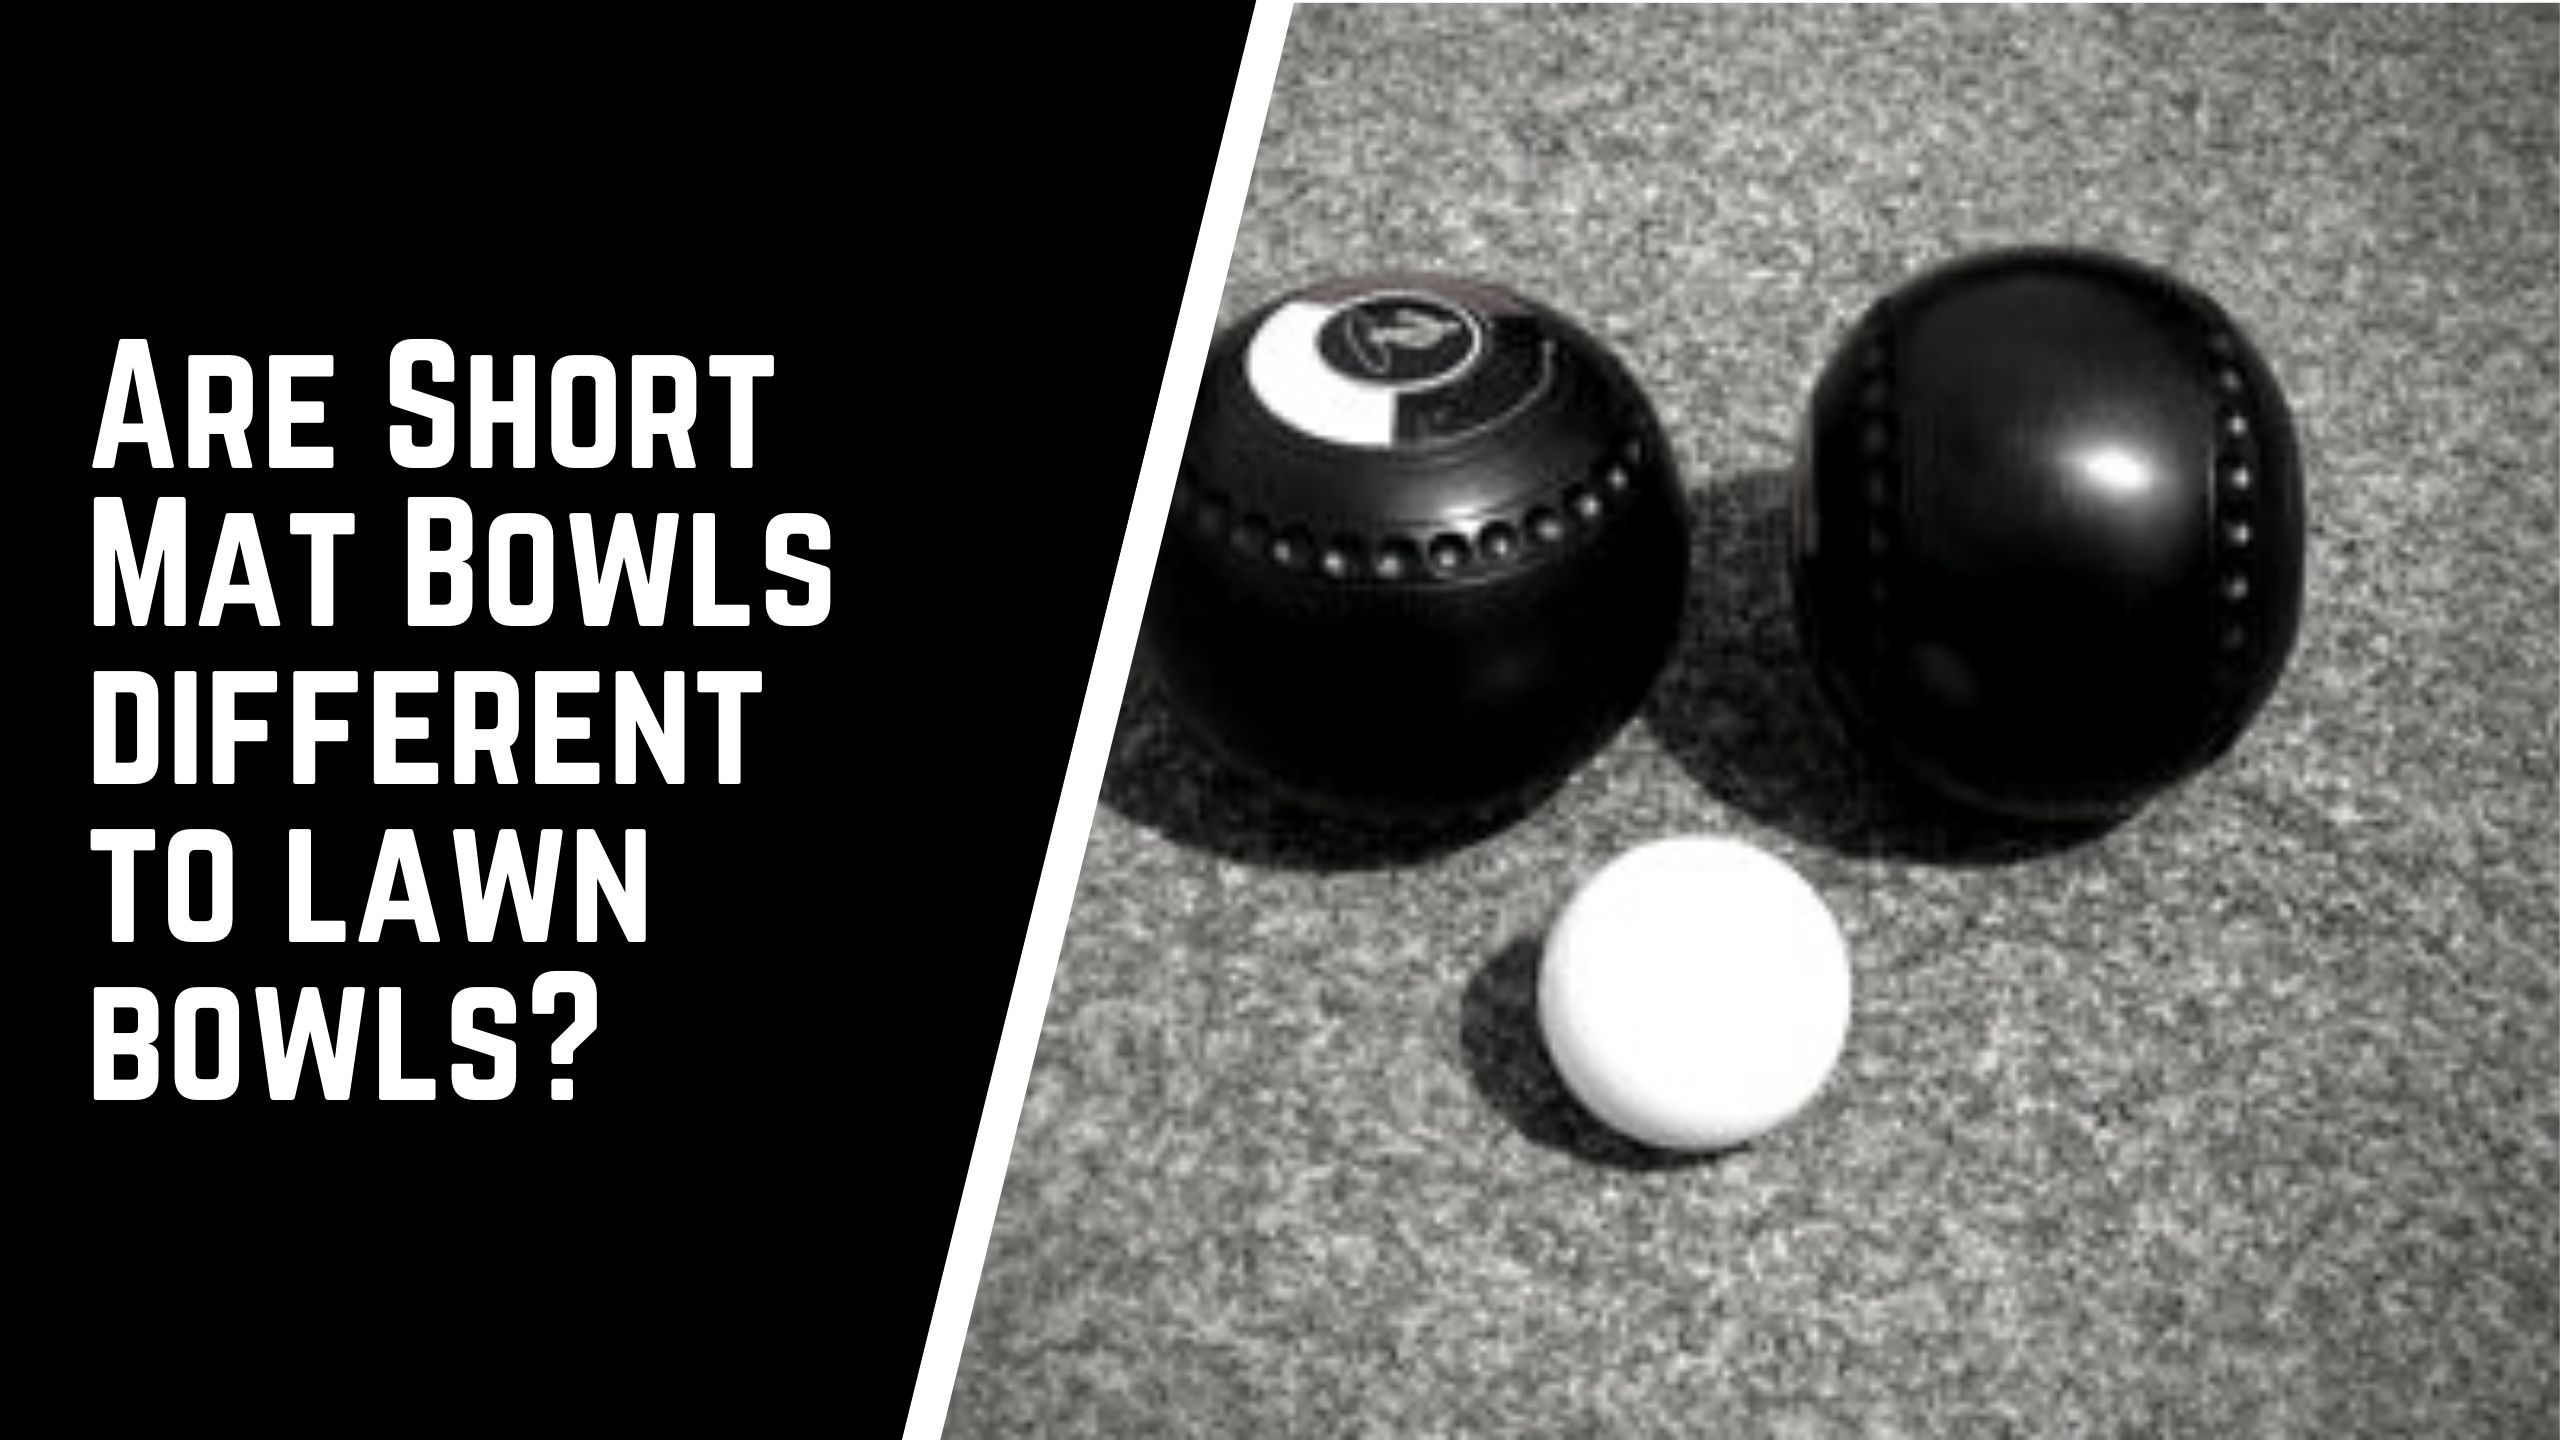 Are Short Mat Bowls Different To Lawn Bowls?